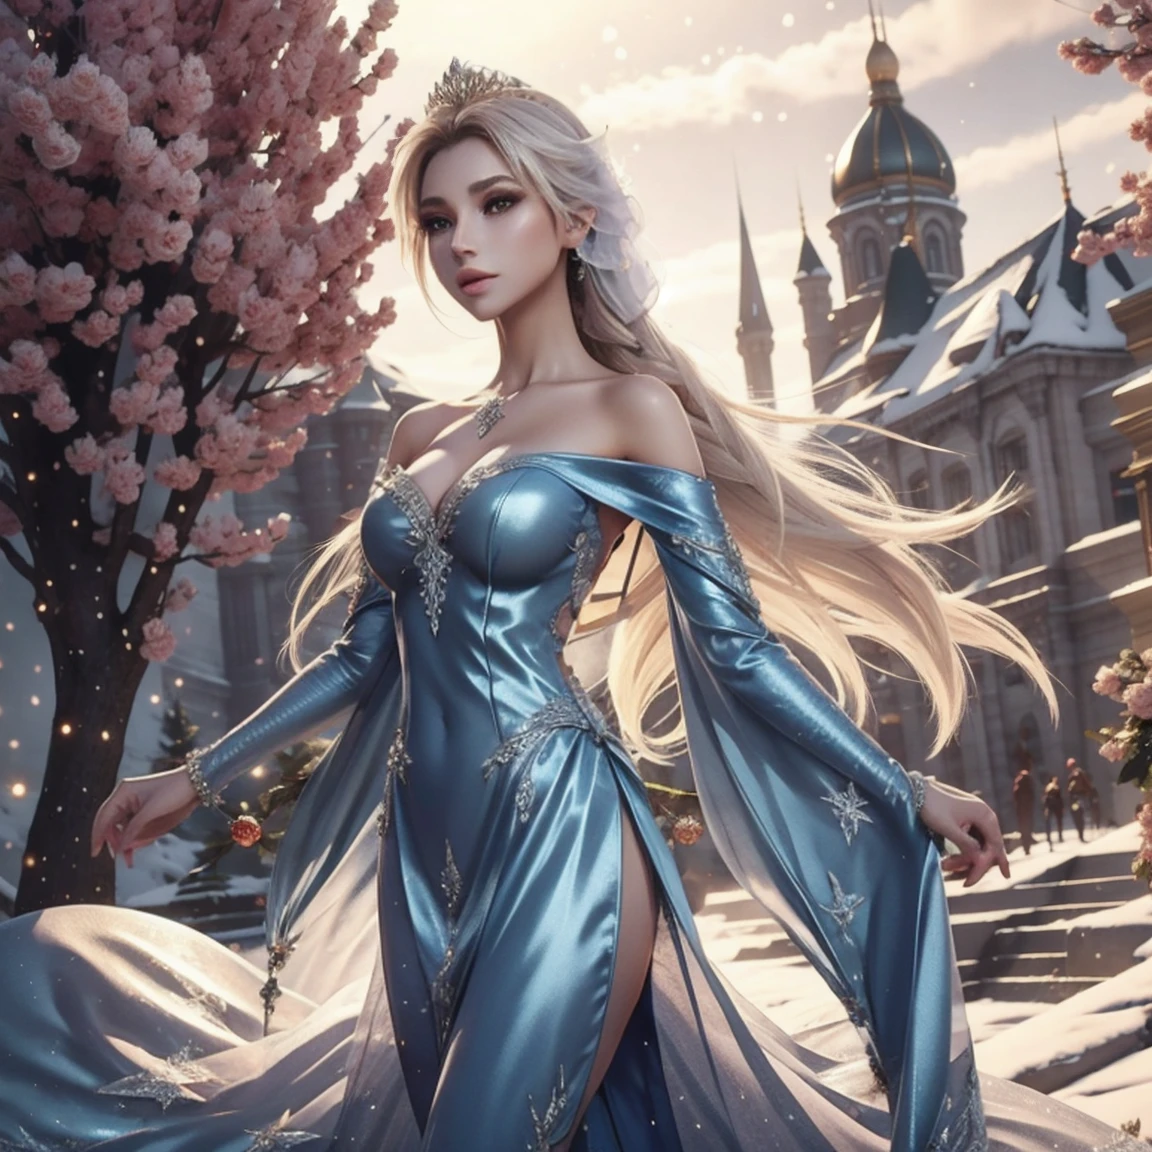 Generate an realistic image of Elsa from Frozen, real character Frozen elsa, dressed in modern fashion for a New Year's . HDR 8K texture dress, visual render Elsa, Elsa should be wearing a red, delicate long dress , along with a New Year's santa hat. The dress should be stylish and suitable for a princess. New Year's dress with real feathers and tassels.